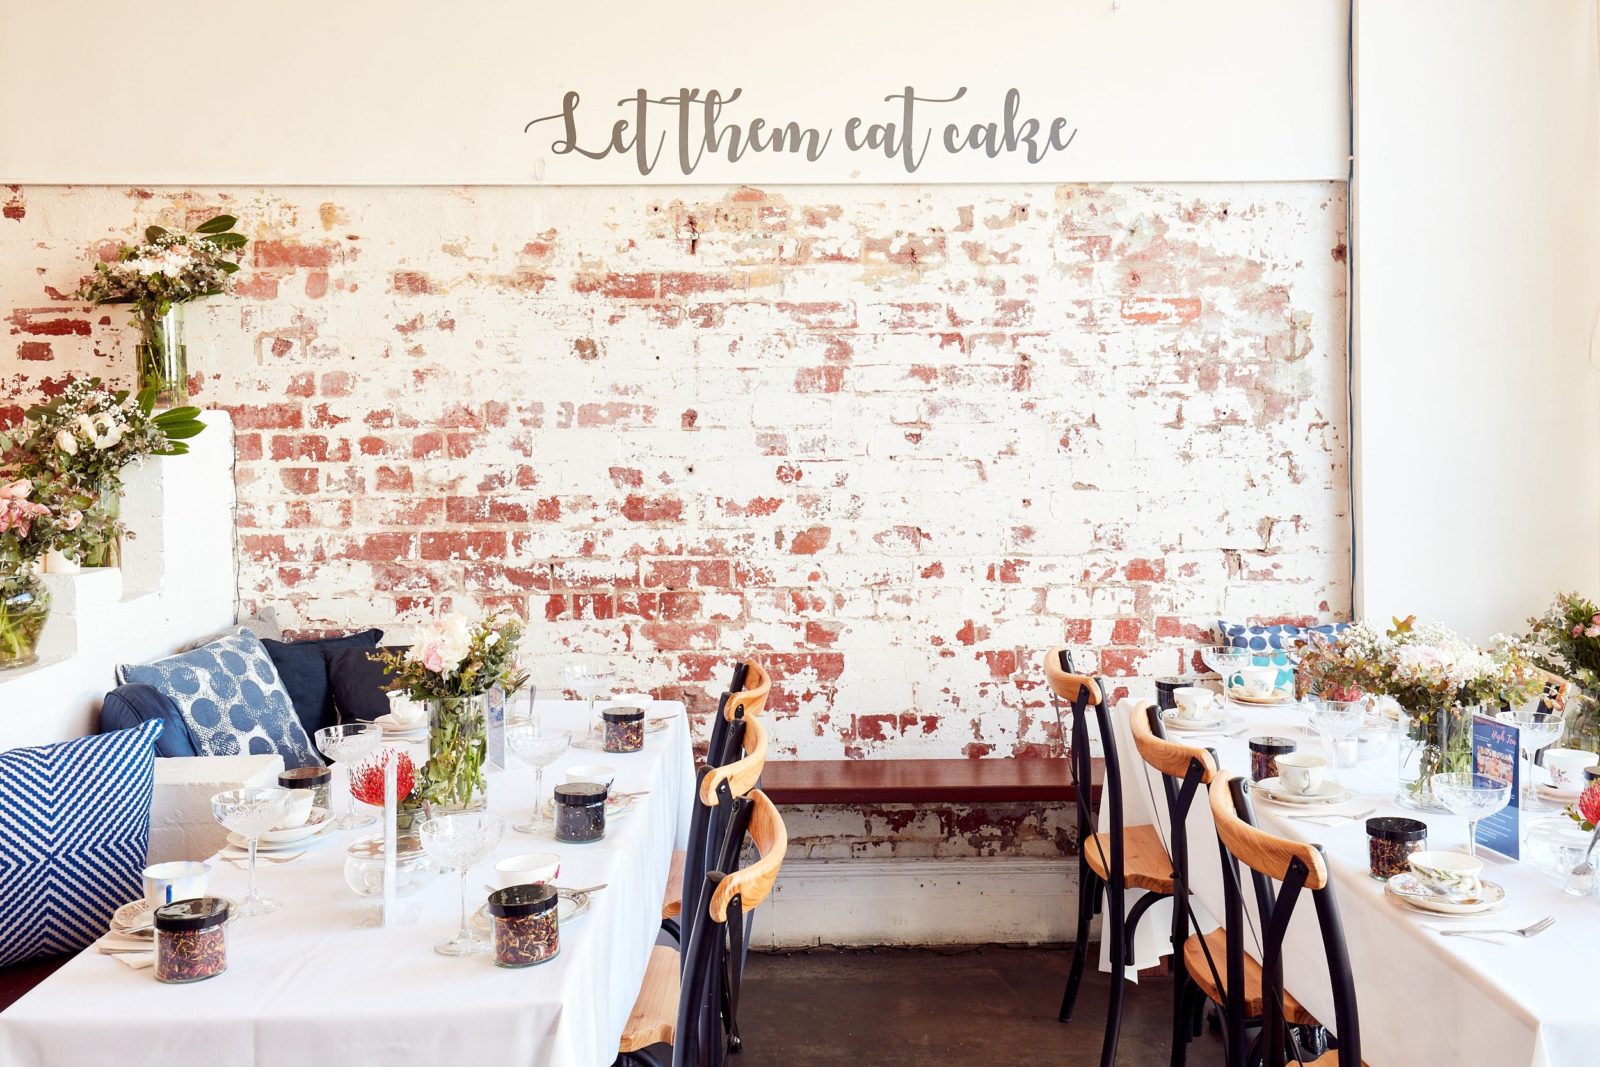 Exposed brick wall, with cursive 'Let them eat cake' written above. Two tables set for high tea.